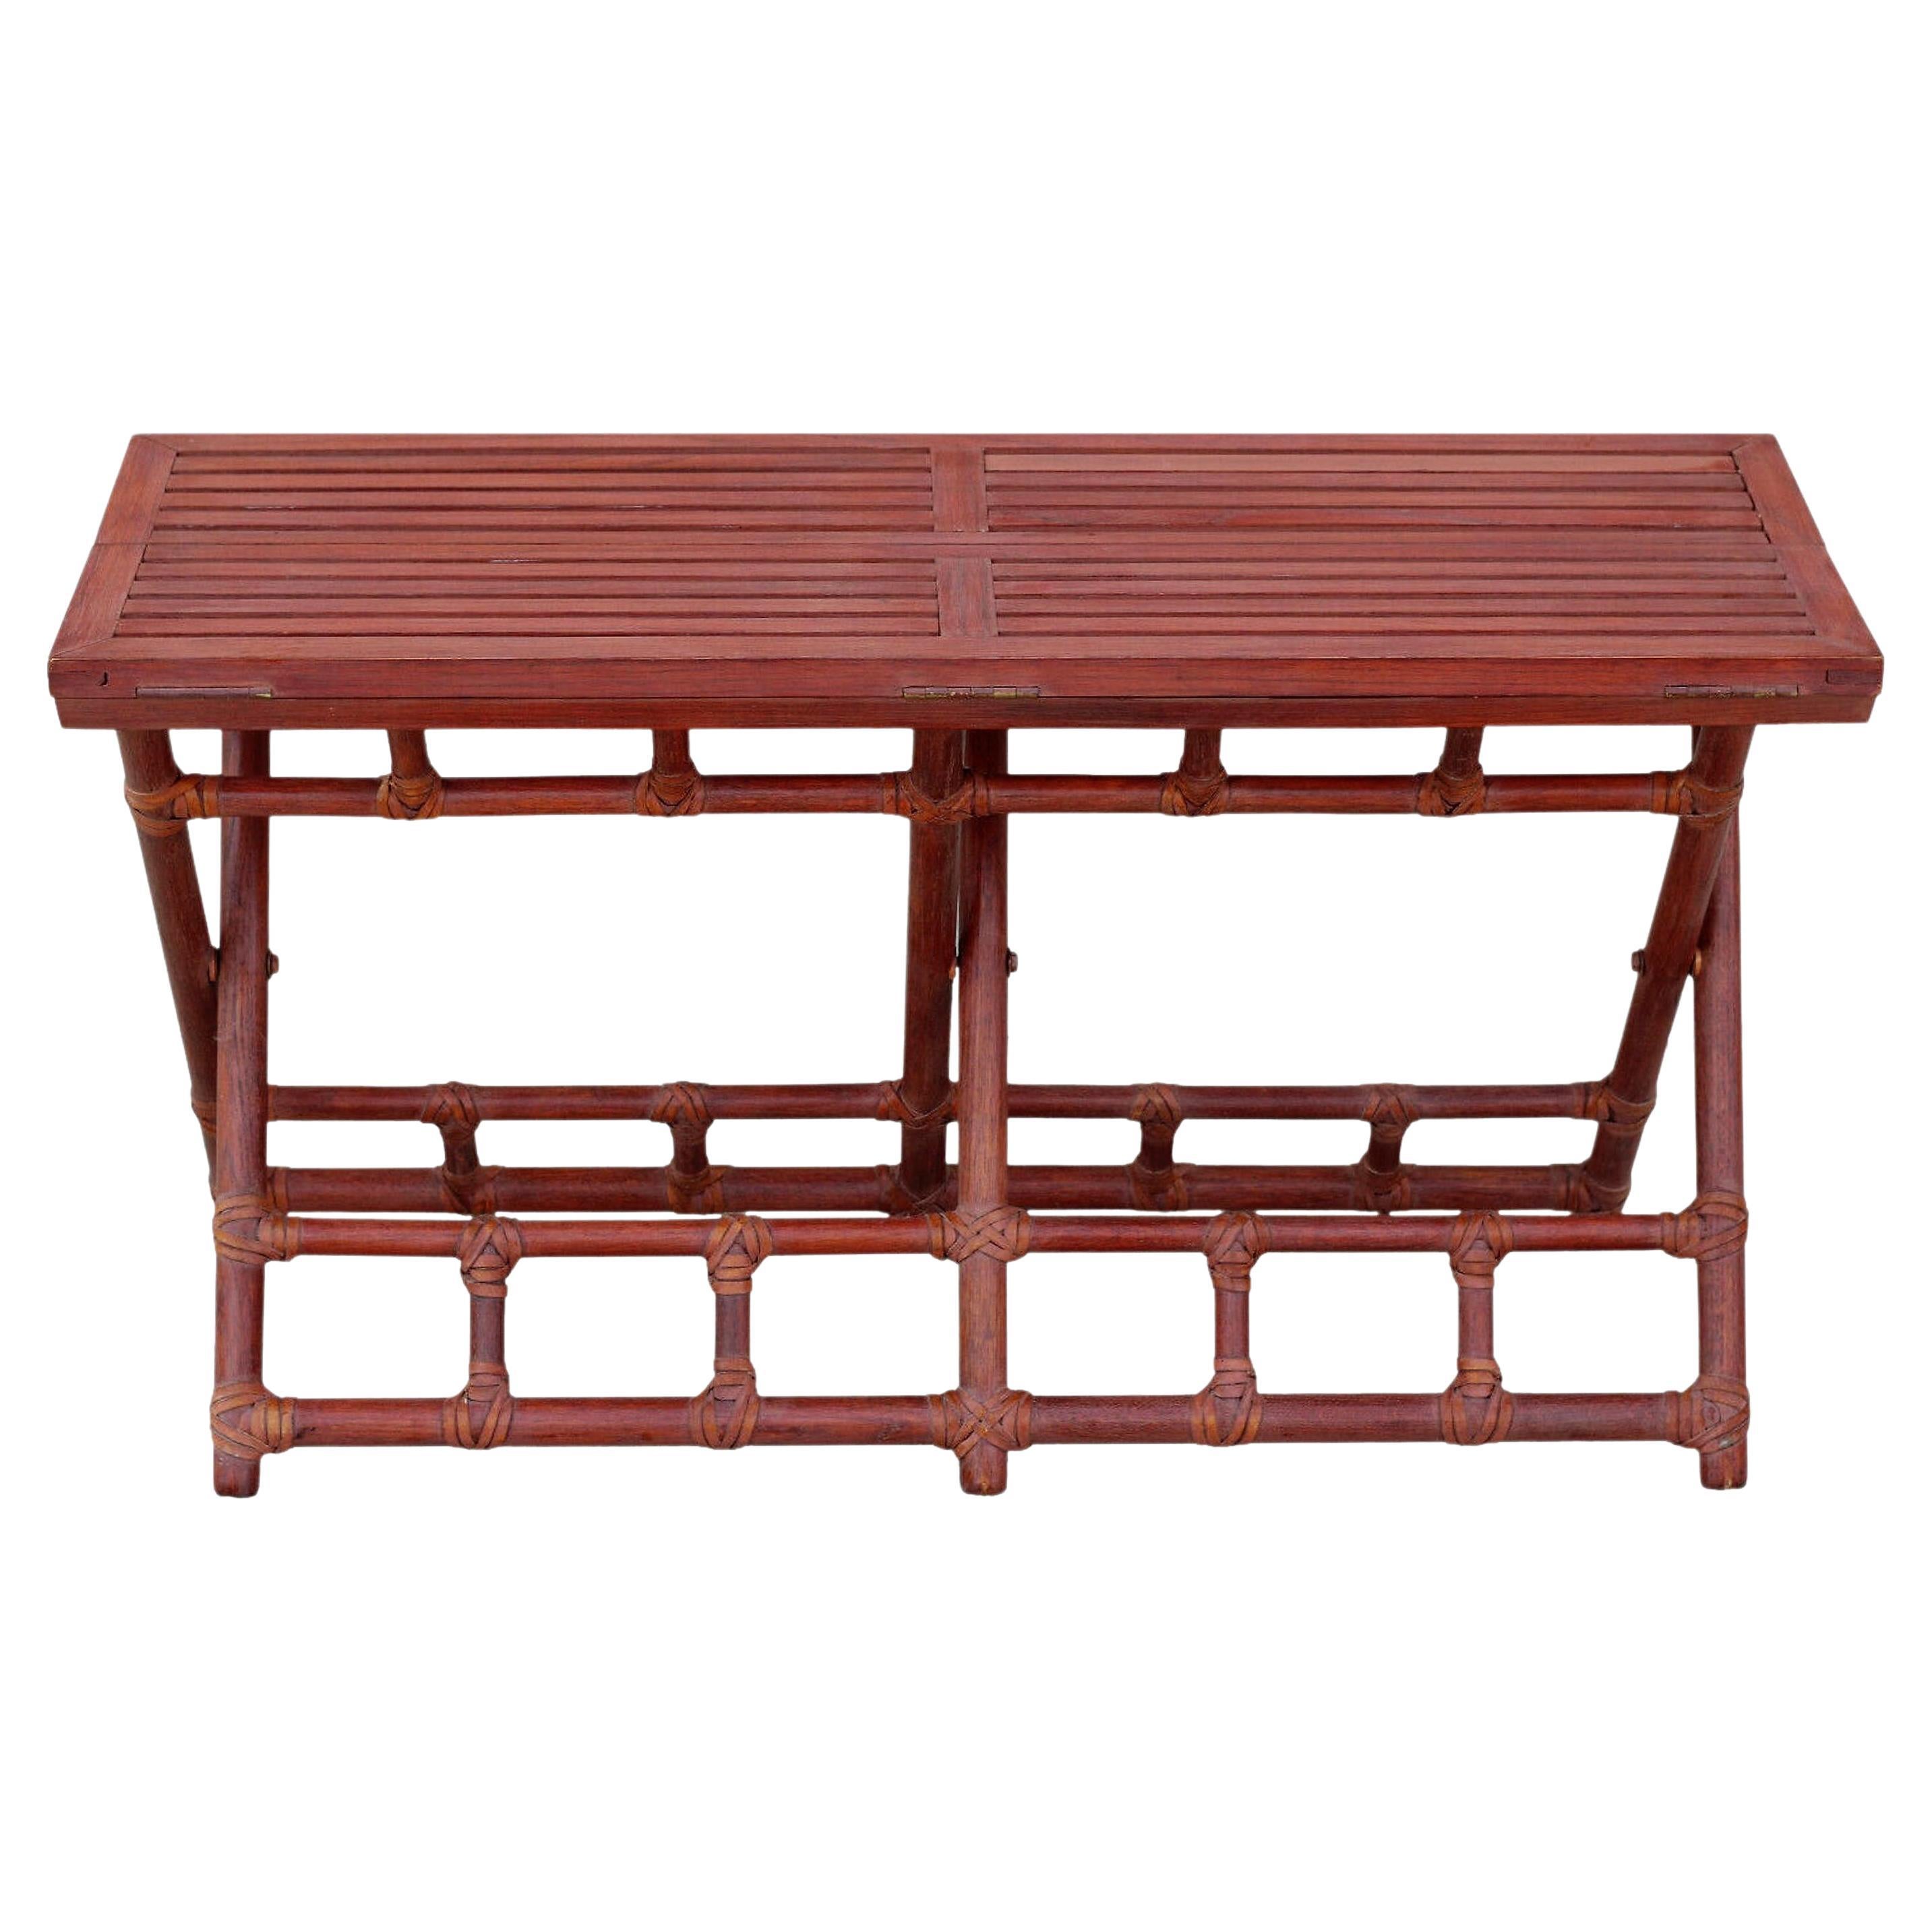 McGuire Oak, Rattan and Rawhide Folding Table or Bench